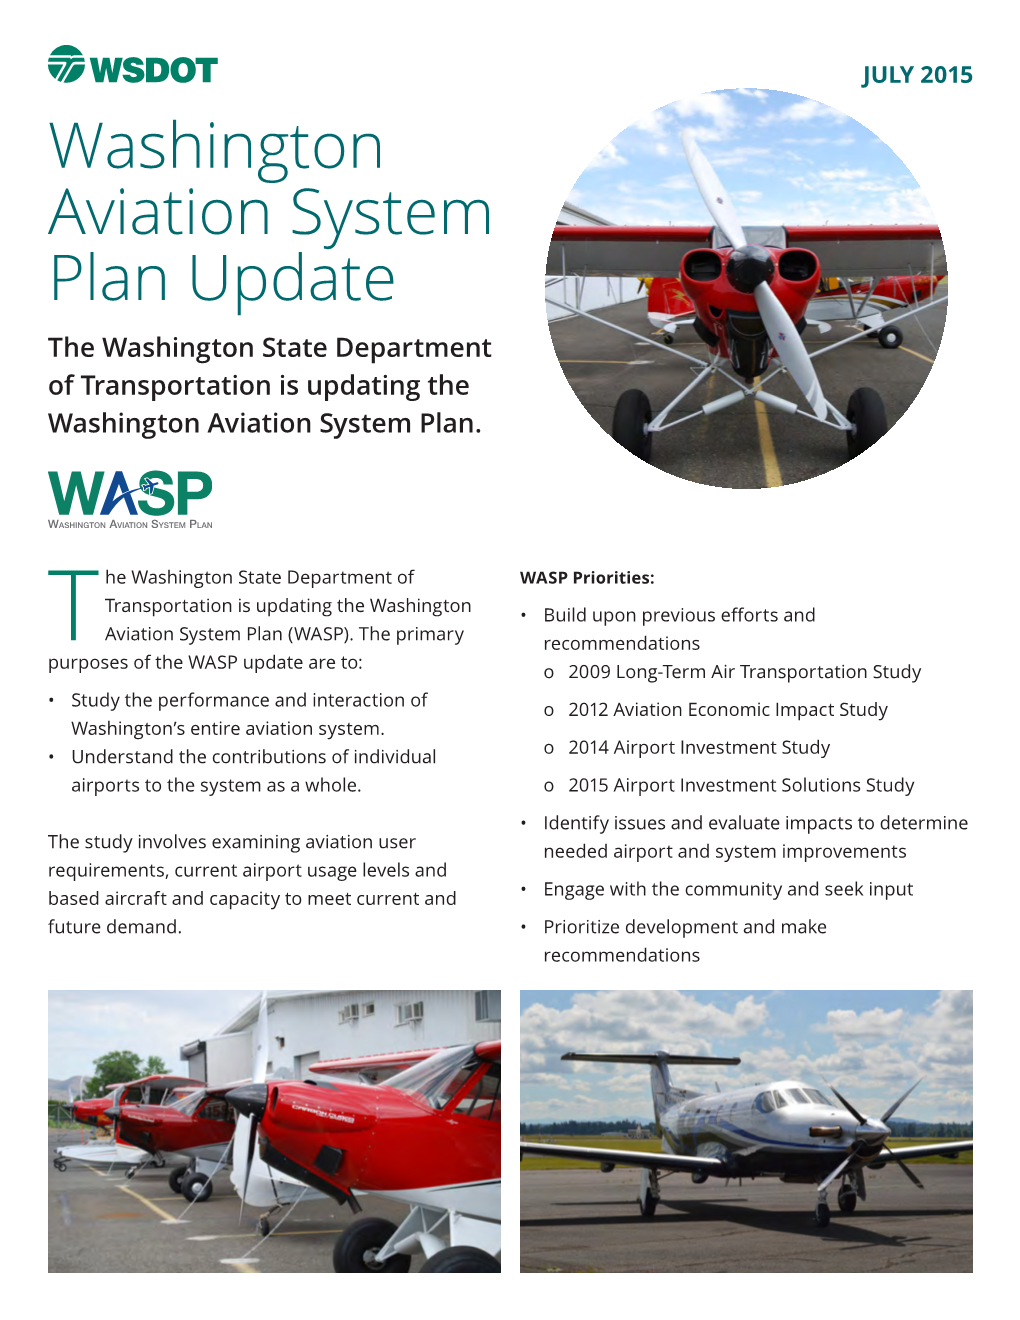 Learn More About the Washington Aviation System Plan Update